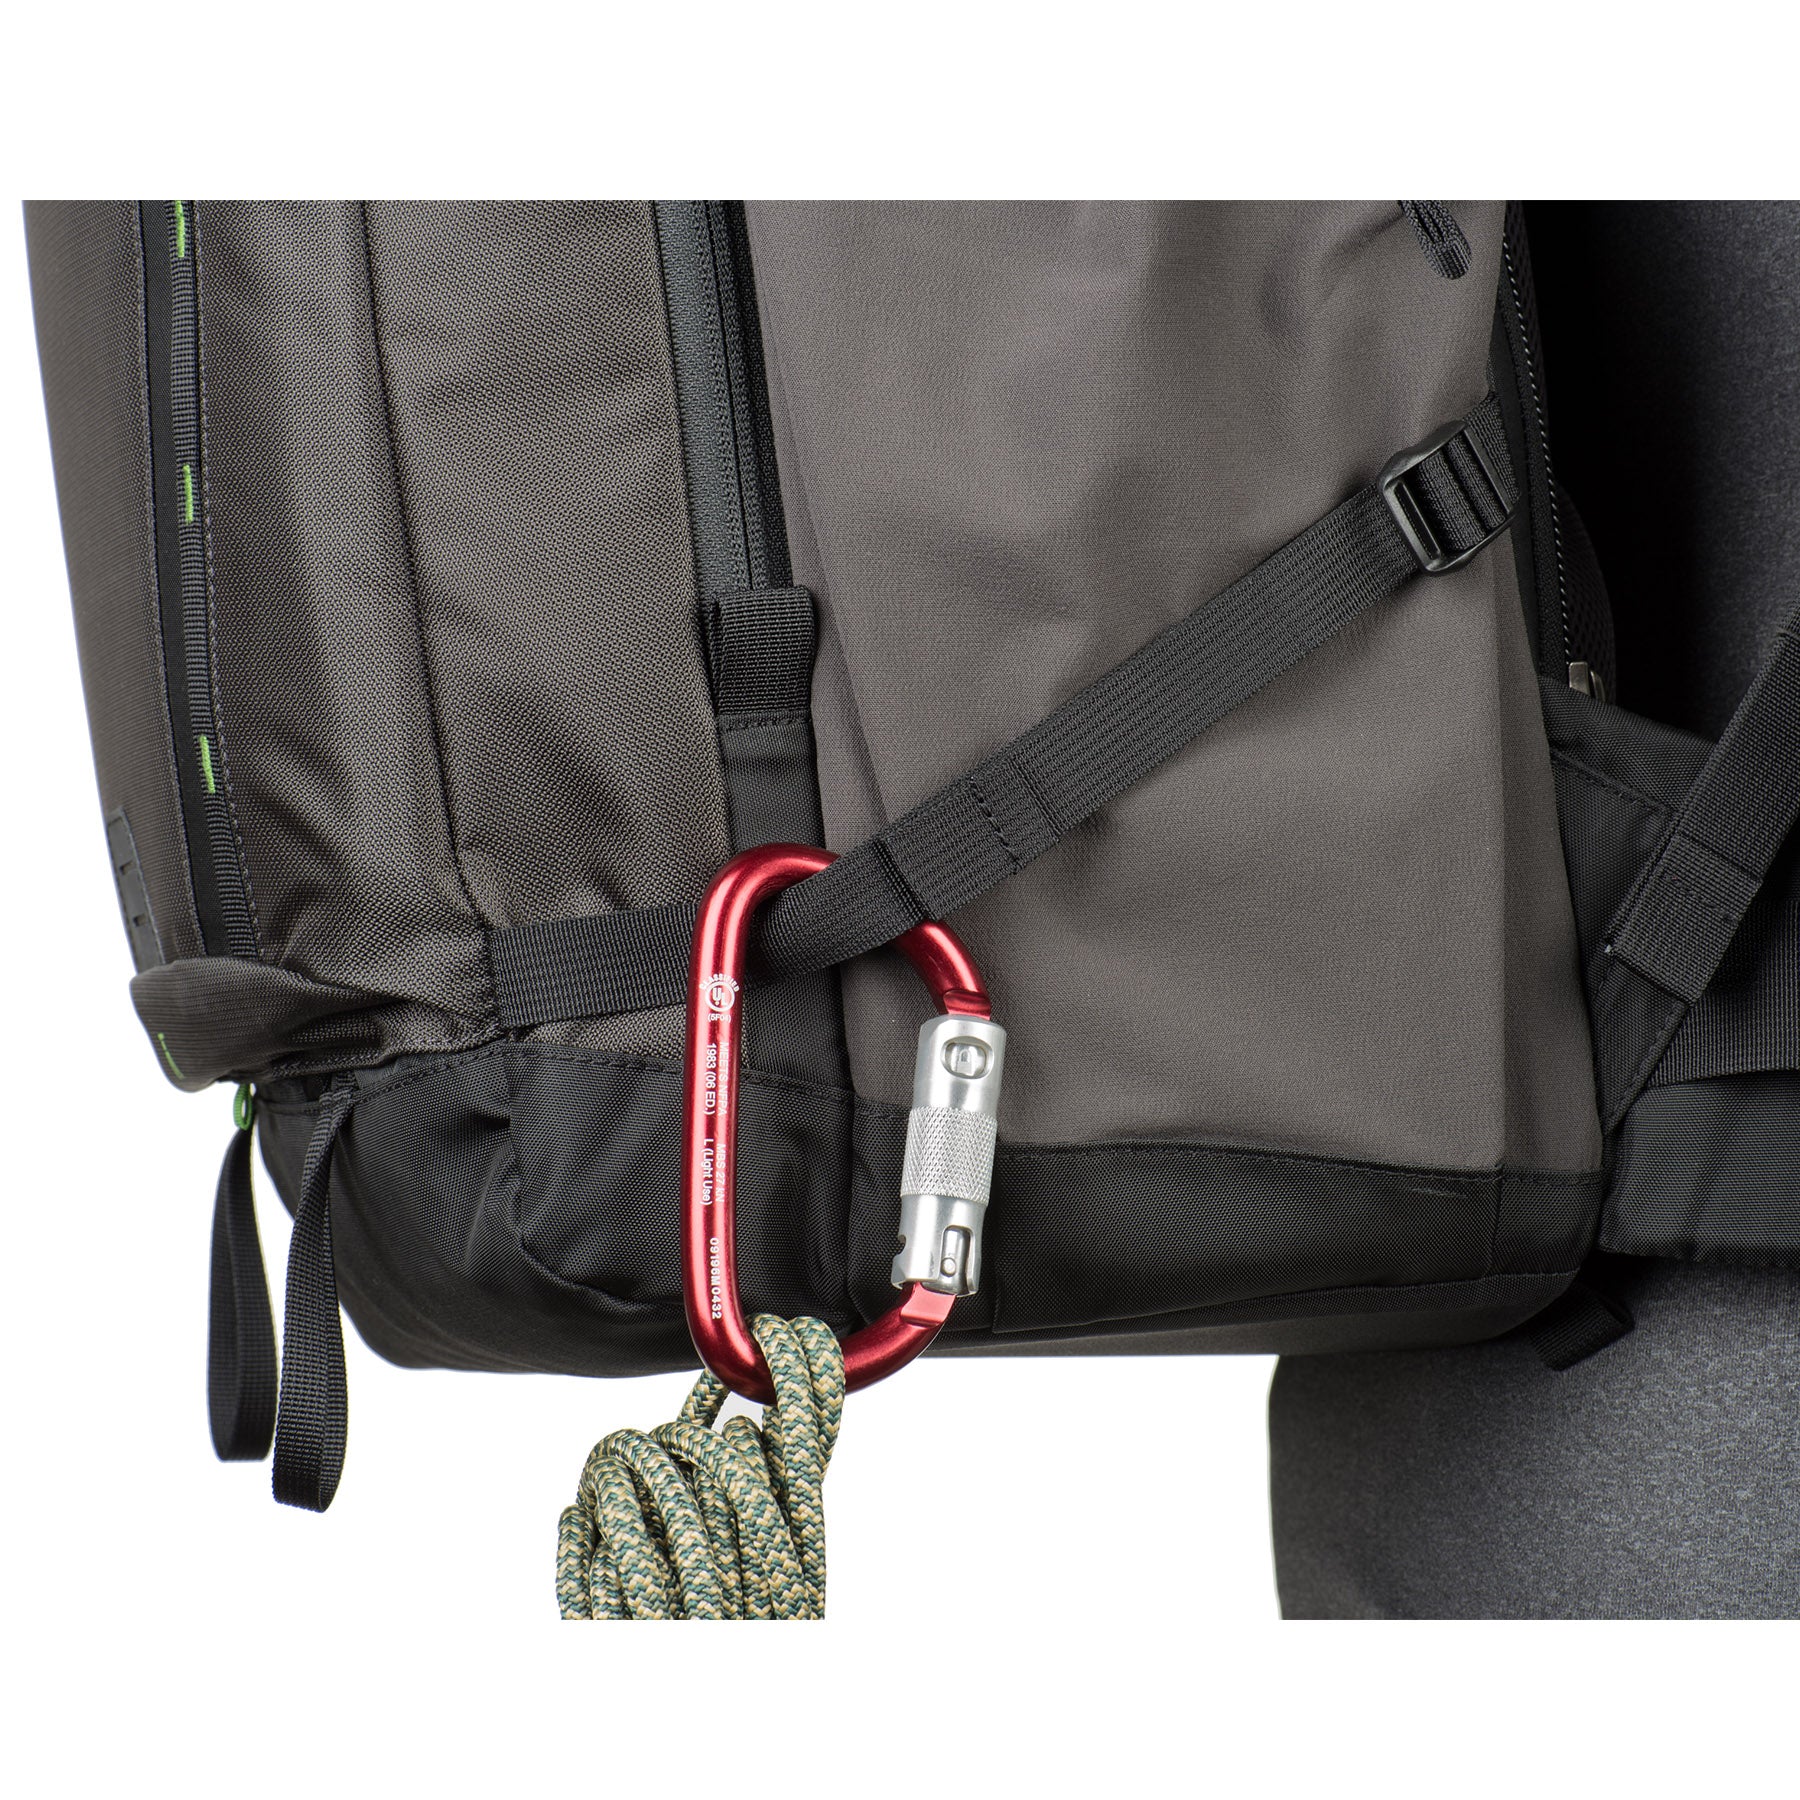 Daisy chain, ice axe loops and additional lash points for expanding your carry capacity